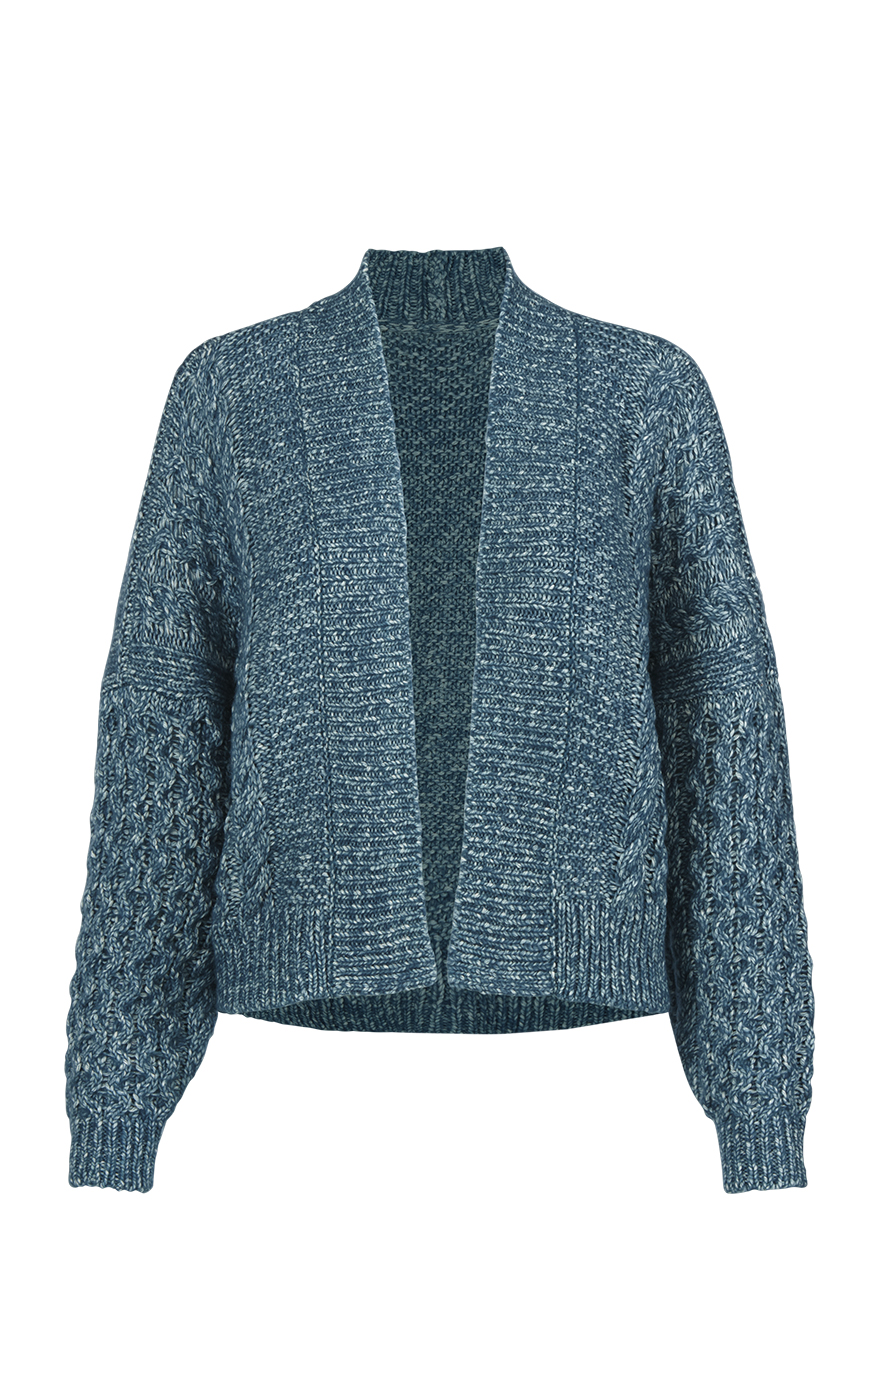 Astral Cardigan - cabi Fall 2021 Collection